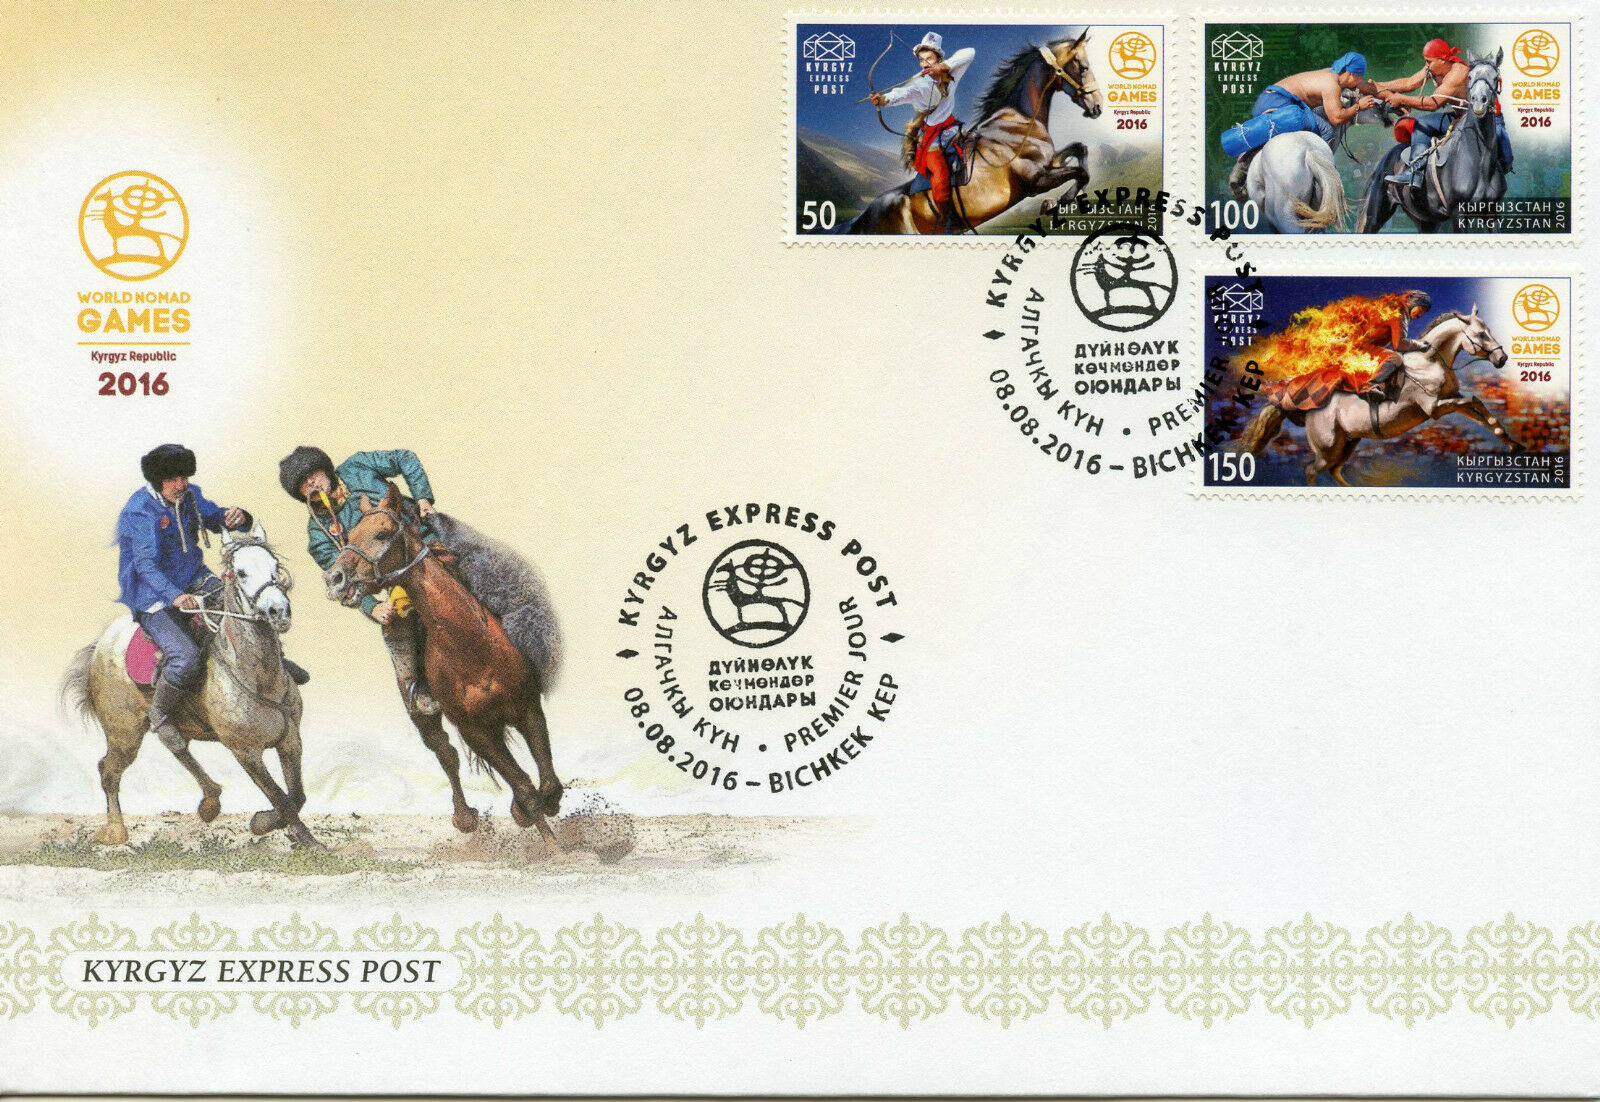 Kyrgyzstan KEP 2016 FDC 2nd World Nomad Games 3v Set Cover Horses Sports Stamps